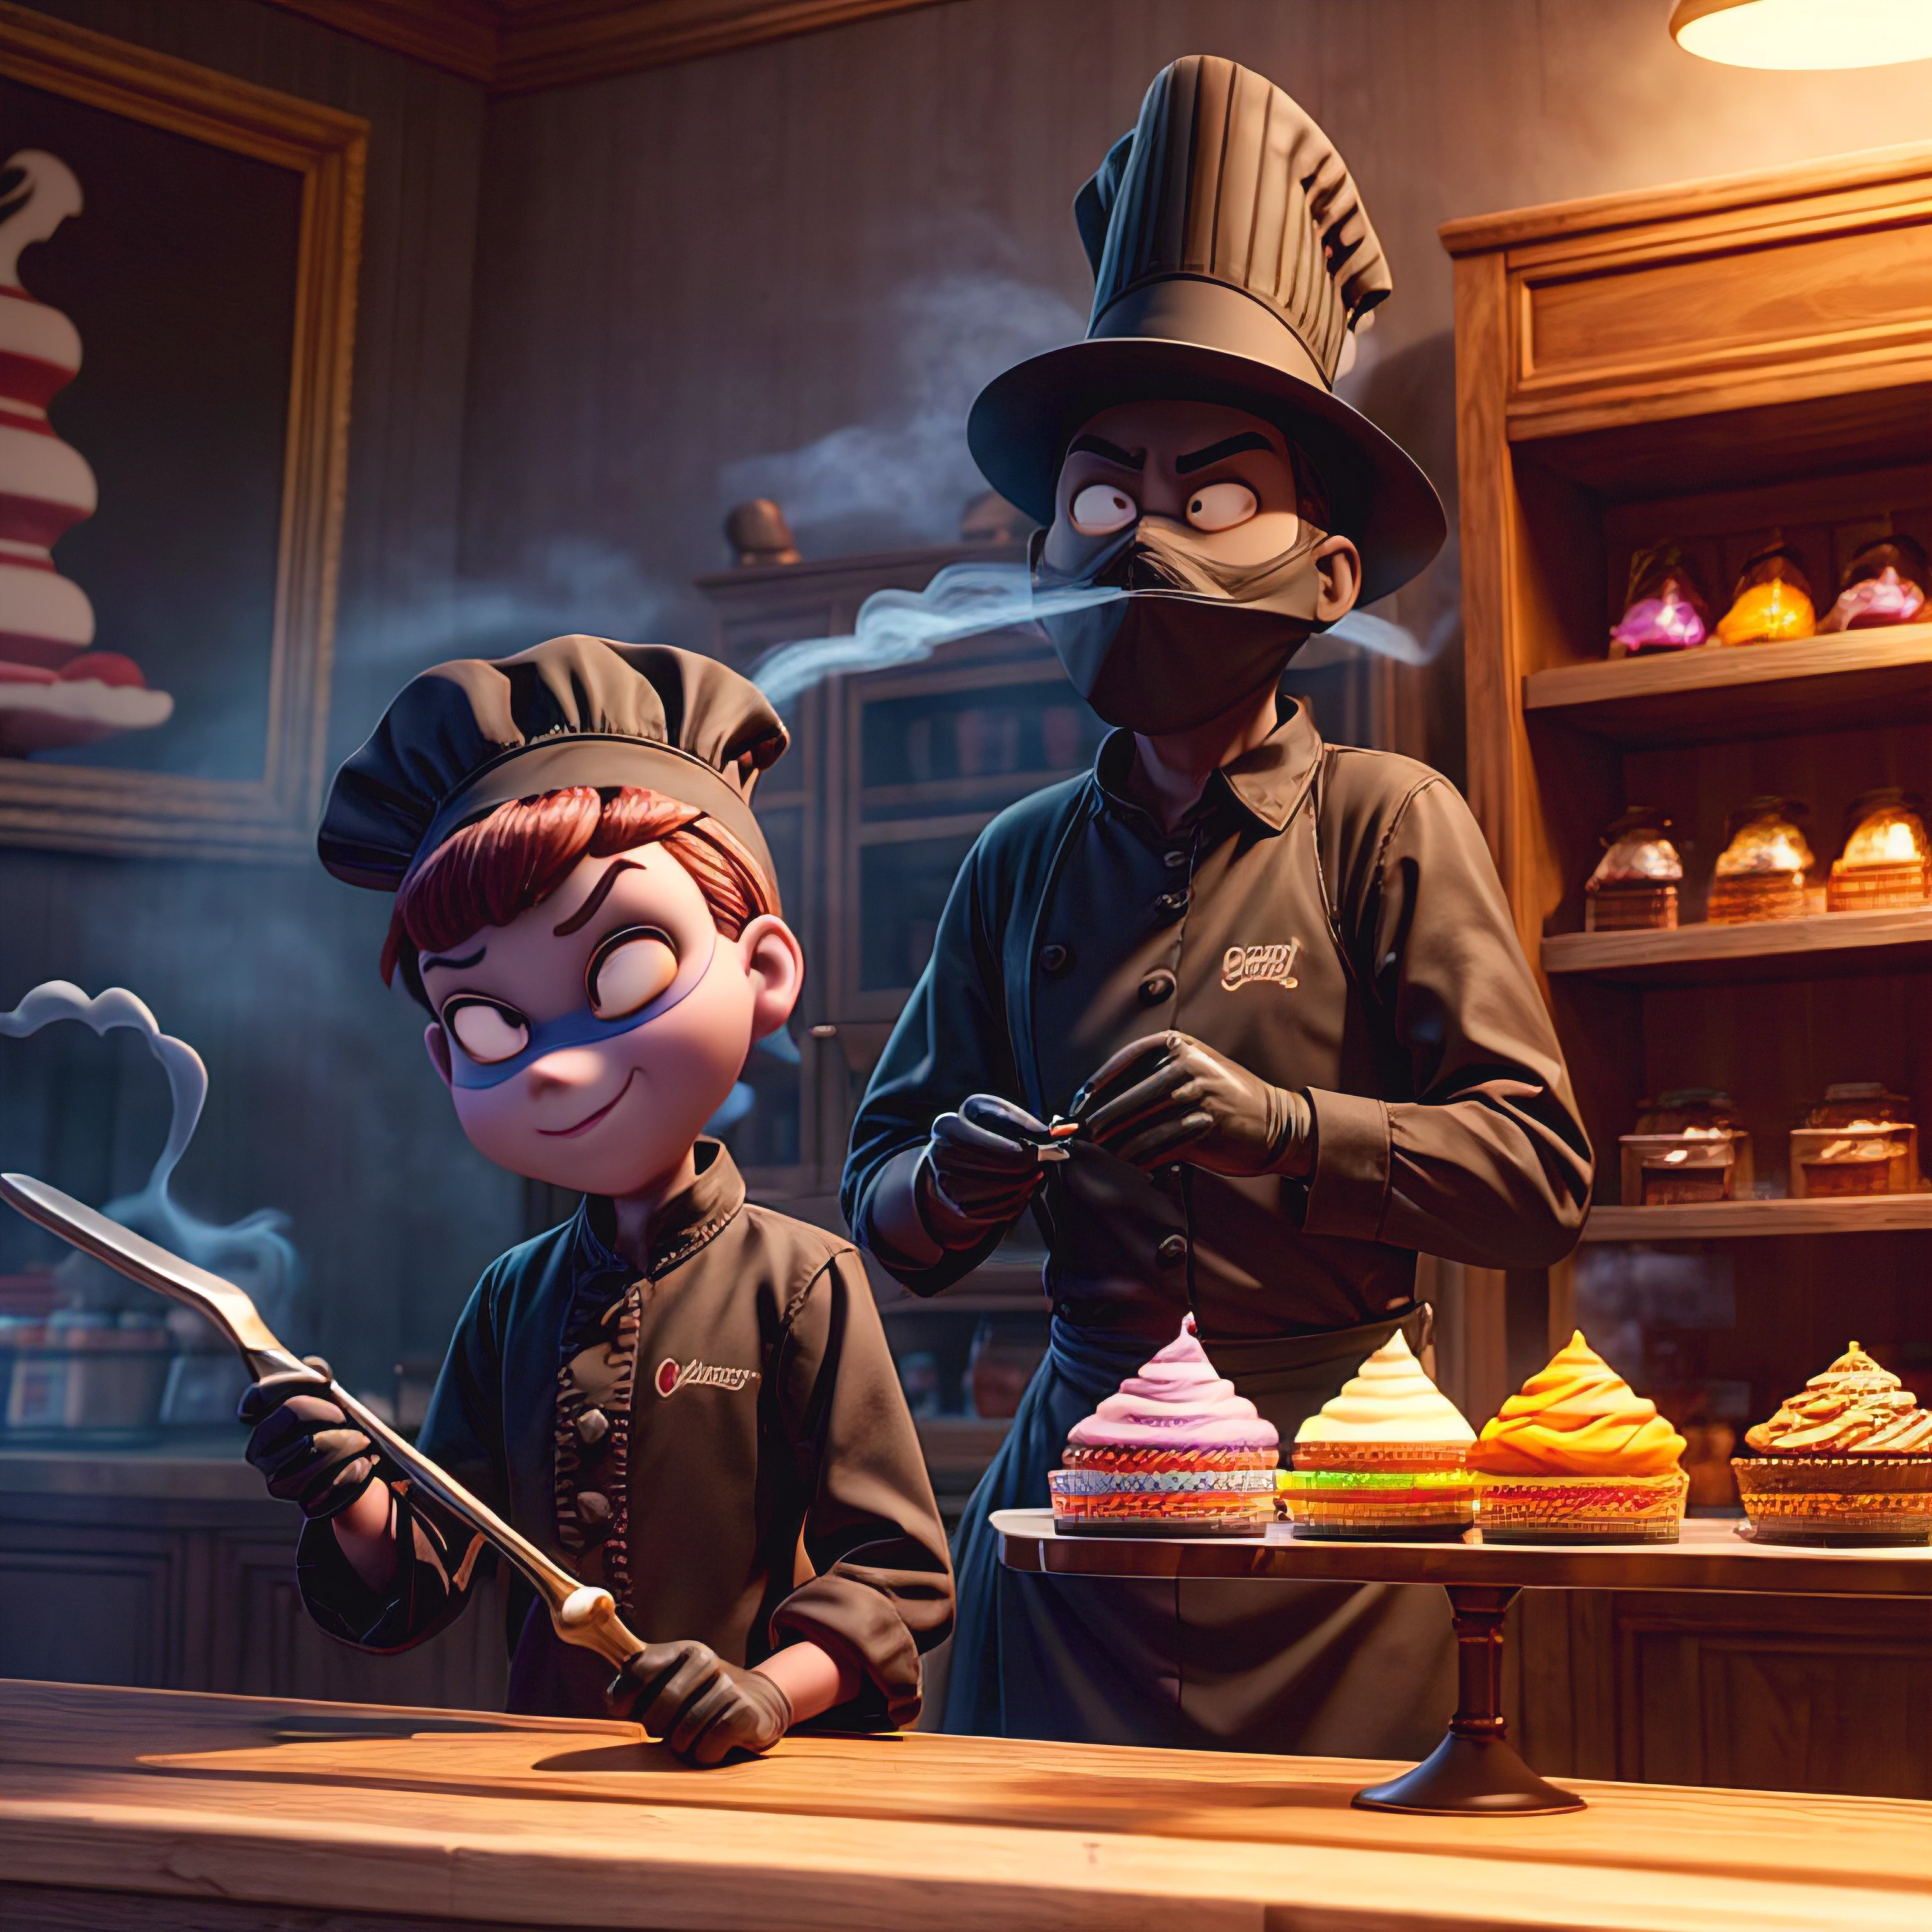 pixar style, a (shadowy smoke monster) posing as a (confectioner) behind a register on a counter in a candy shop, chef-hat, (low angle), detailed, high resolution, high quality, 8k, high saturation, ominous, hiding in plain sight